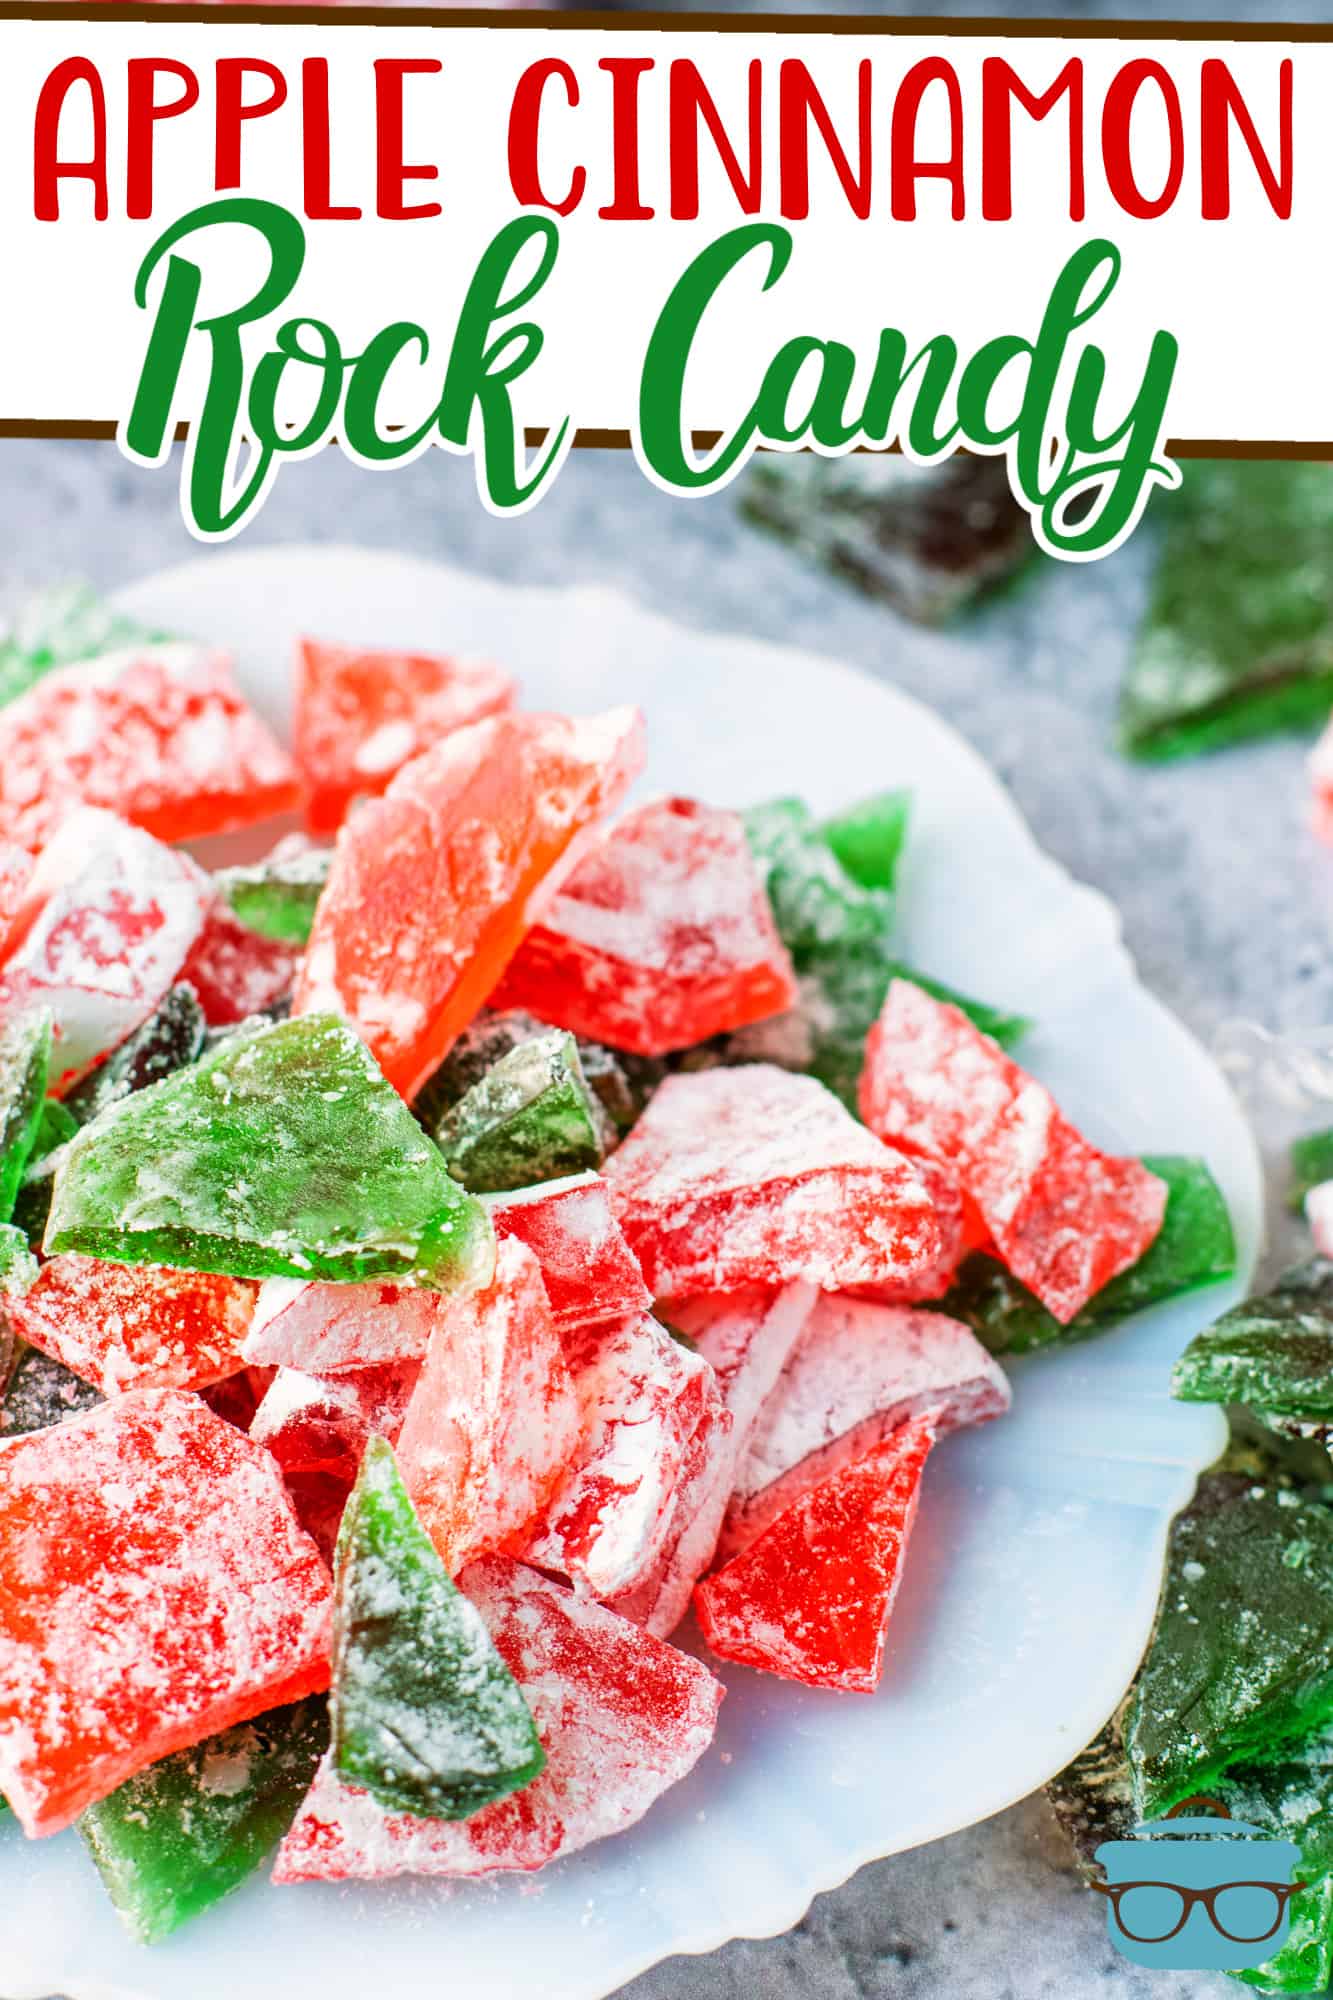 Apple Cinnamon Rock Candy recipe from The Country Cook, red and green pieces of rock candy shown on a white plate.